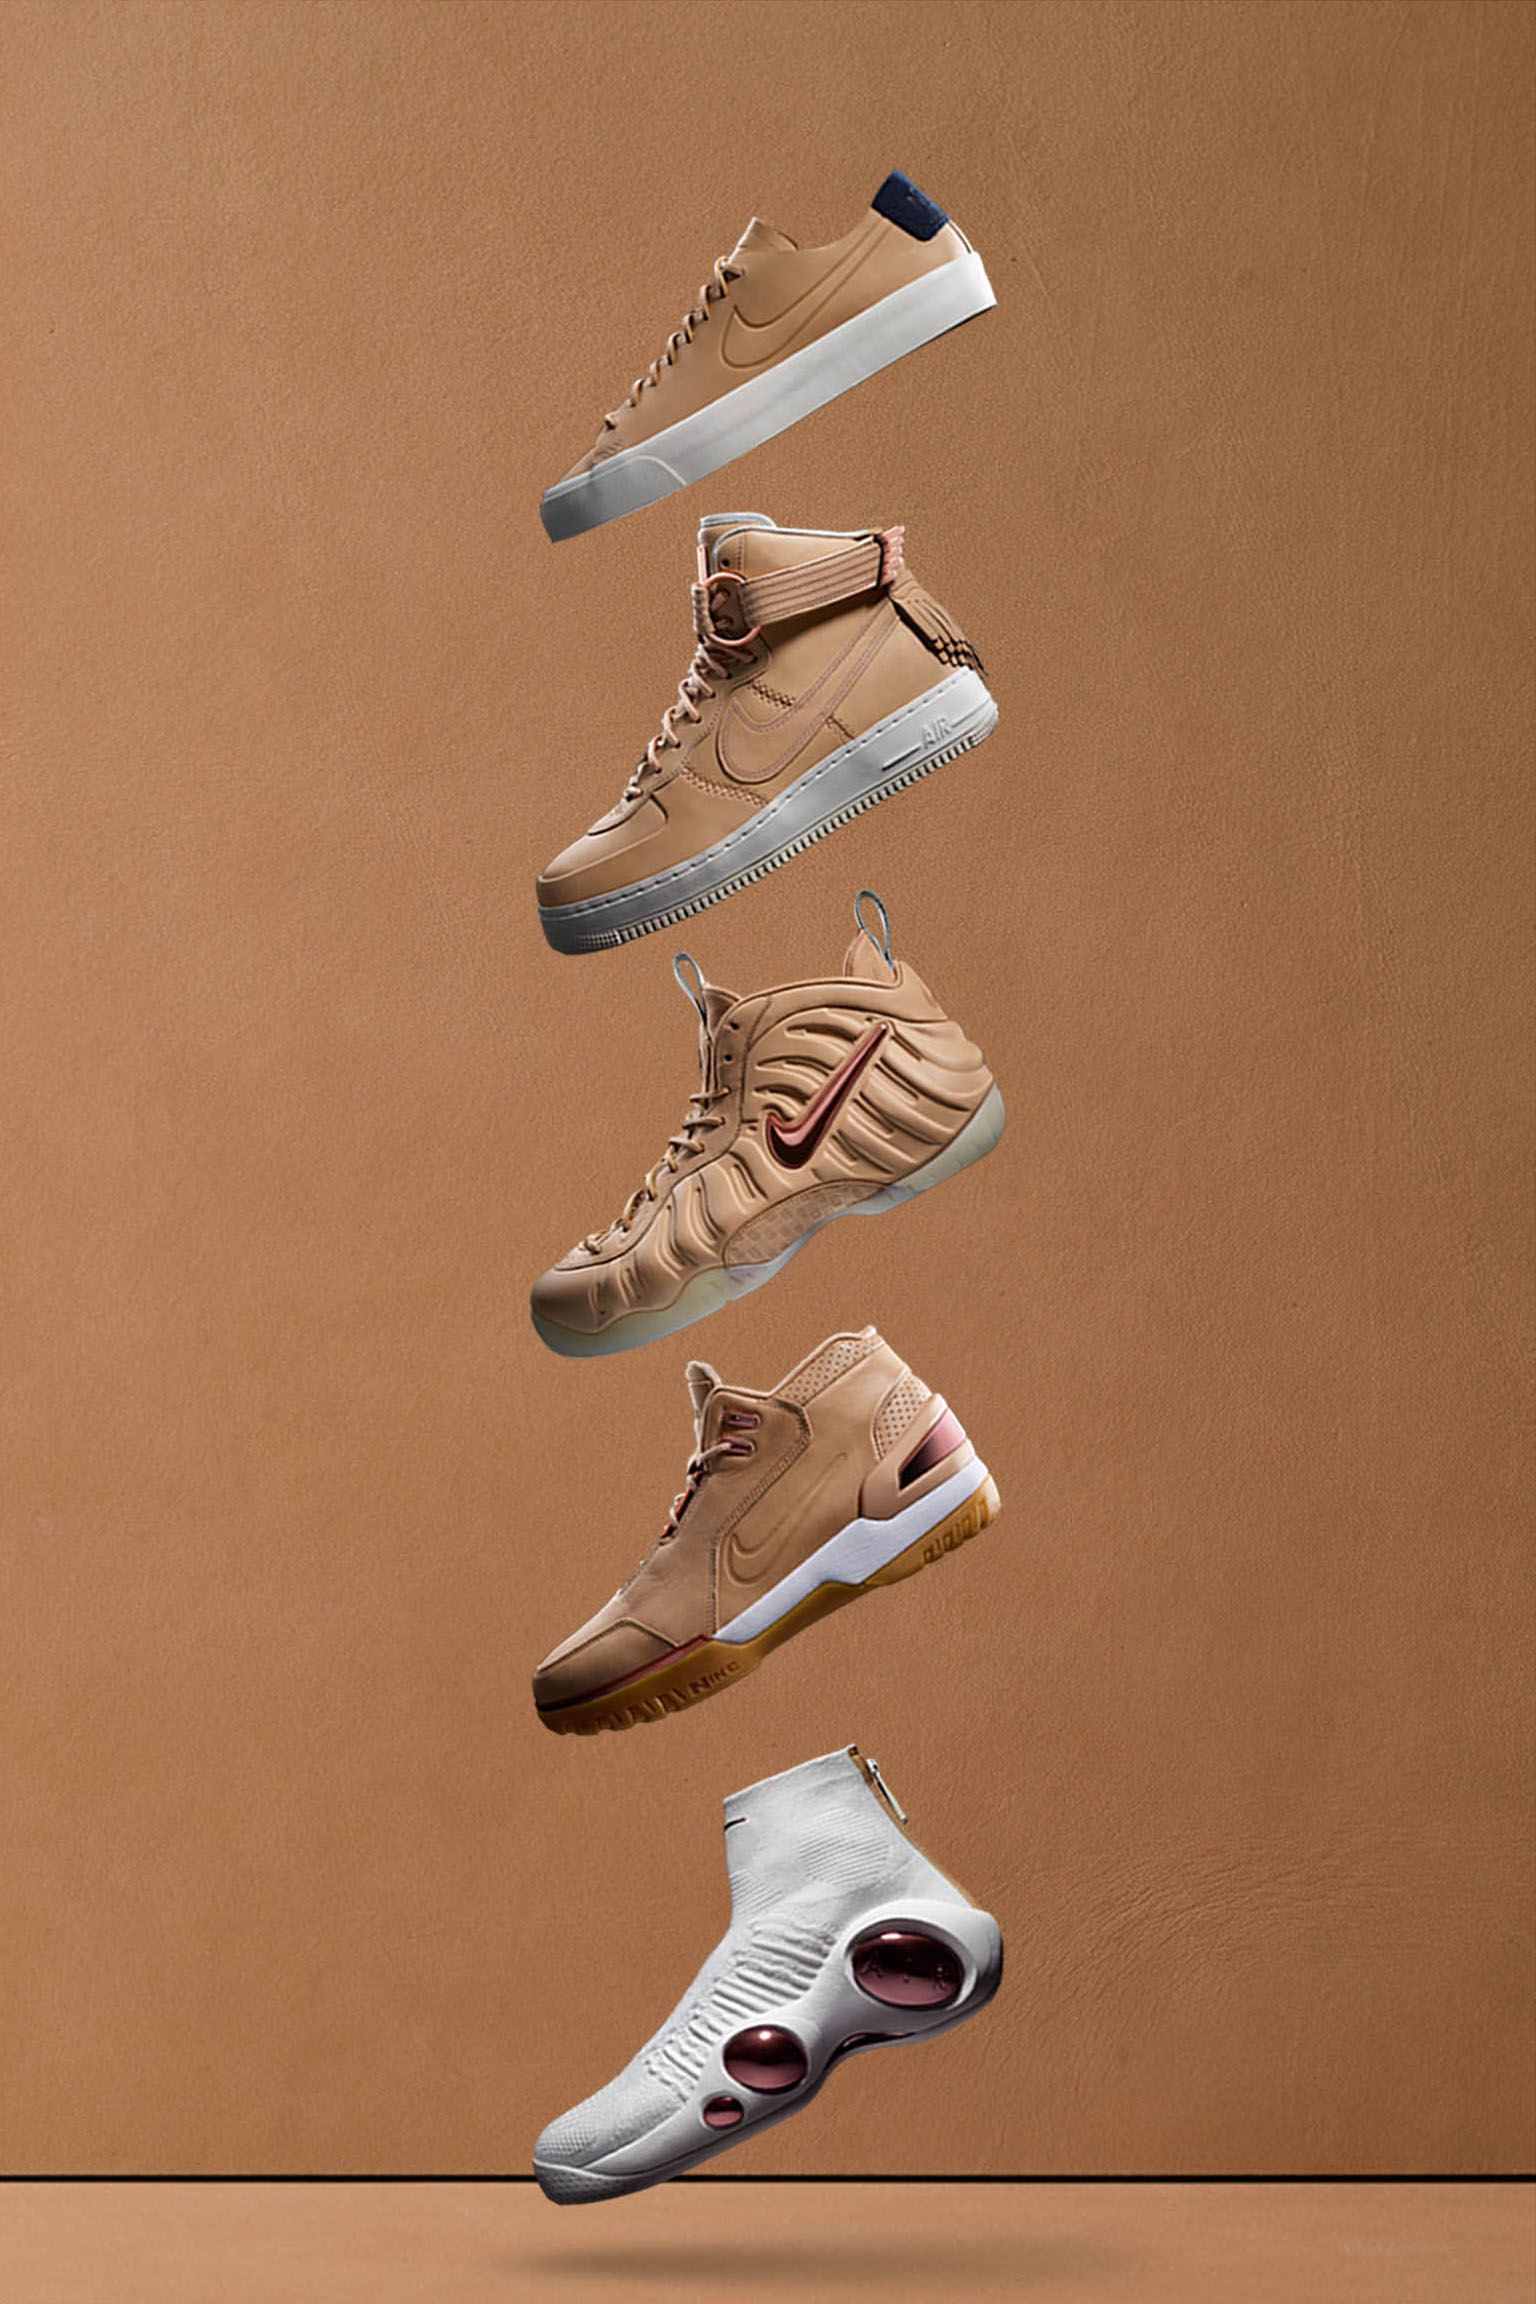 nudo Betsy Trotwood candidato Nike Air Force 1 High Sport Luxury 'Vachetta Tan'. Nike SNKRS